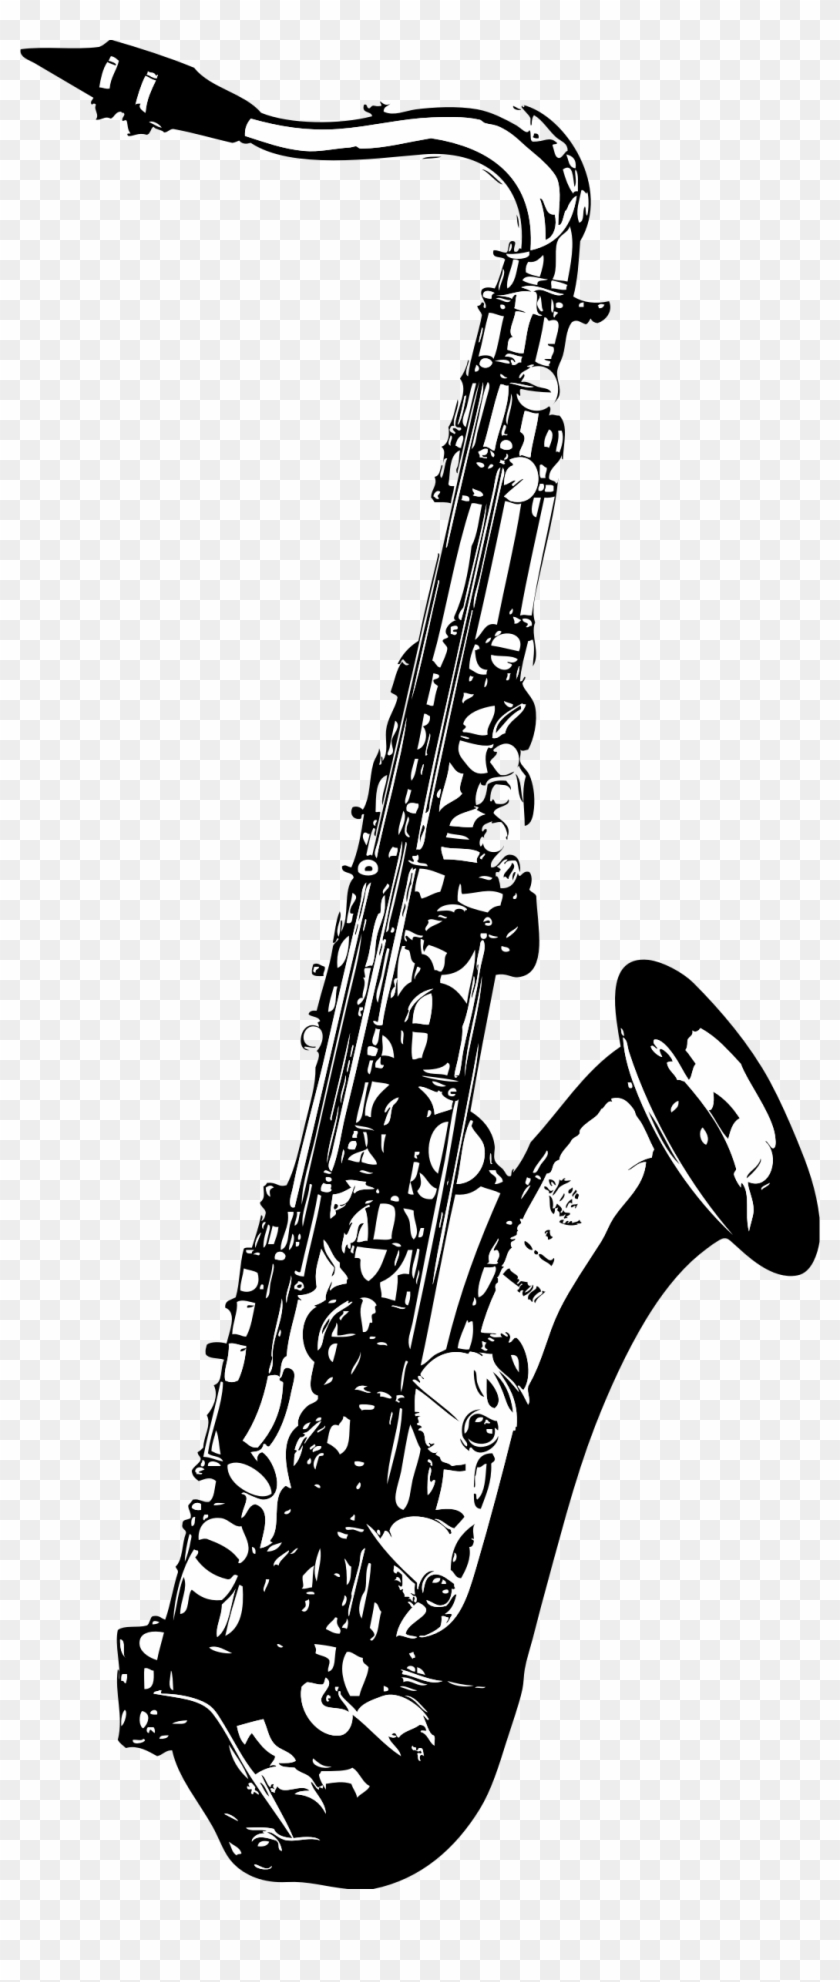 This Free Icons Png Design Of Tenor Saxophone Clipart #323519